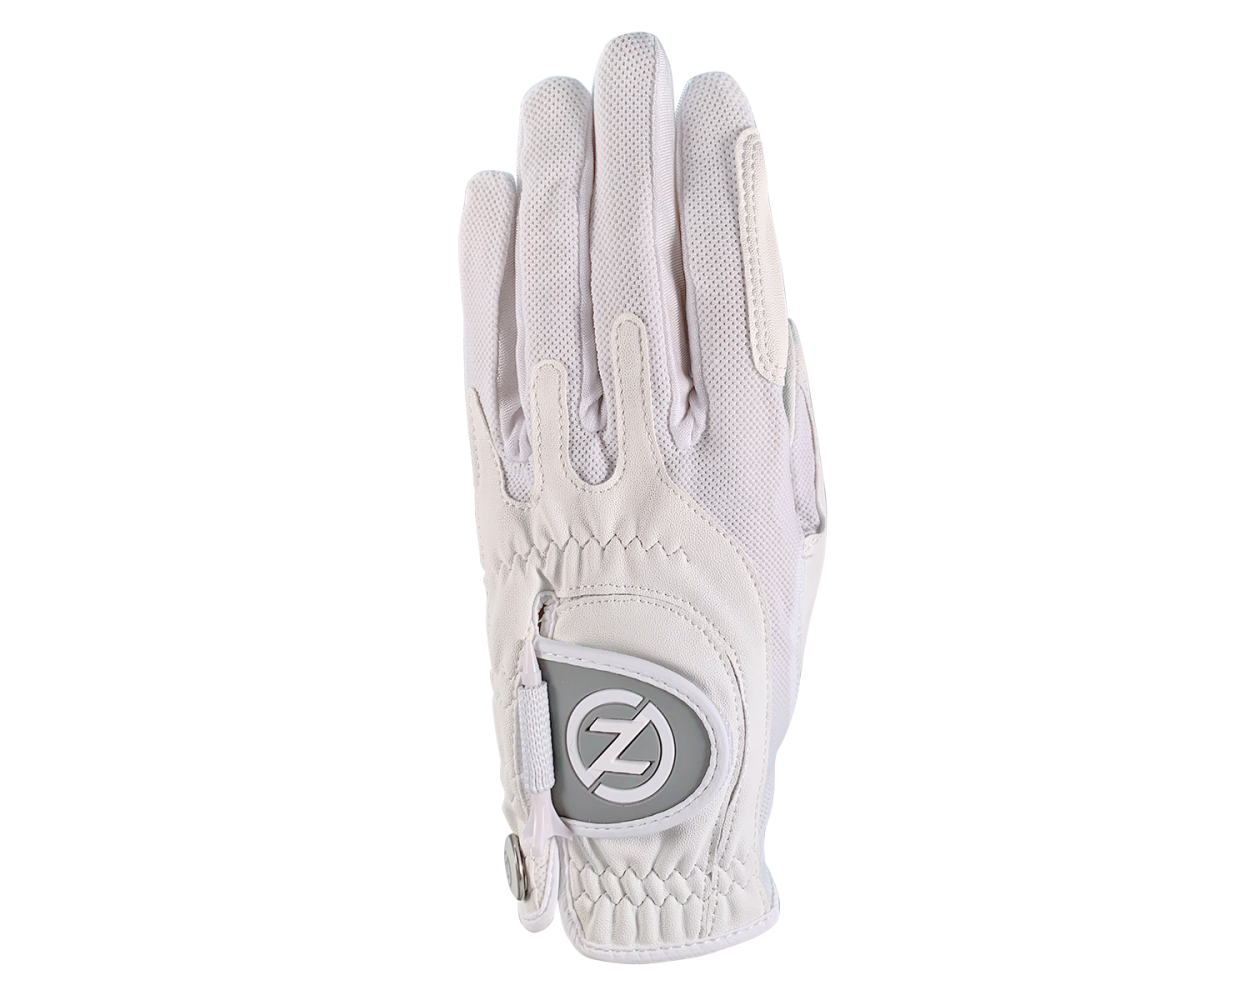 Zero Friction Women's Compression-Fit Synthetic Golf Glove - RH Universal Fit One Size